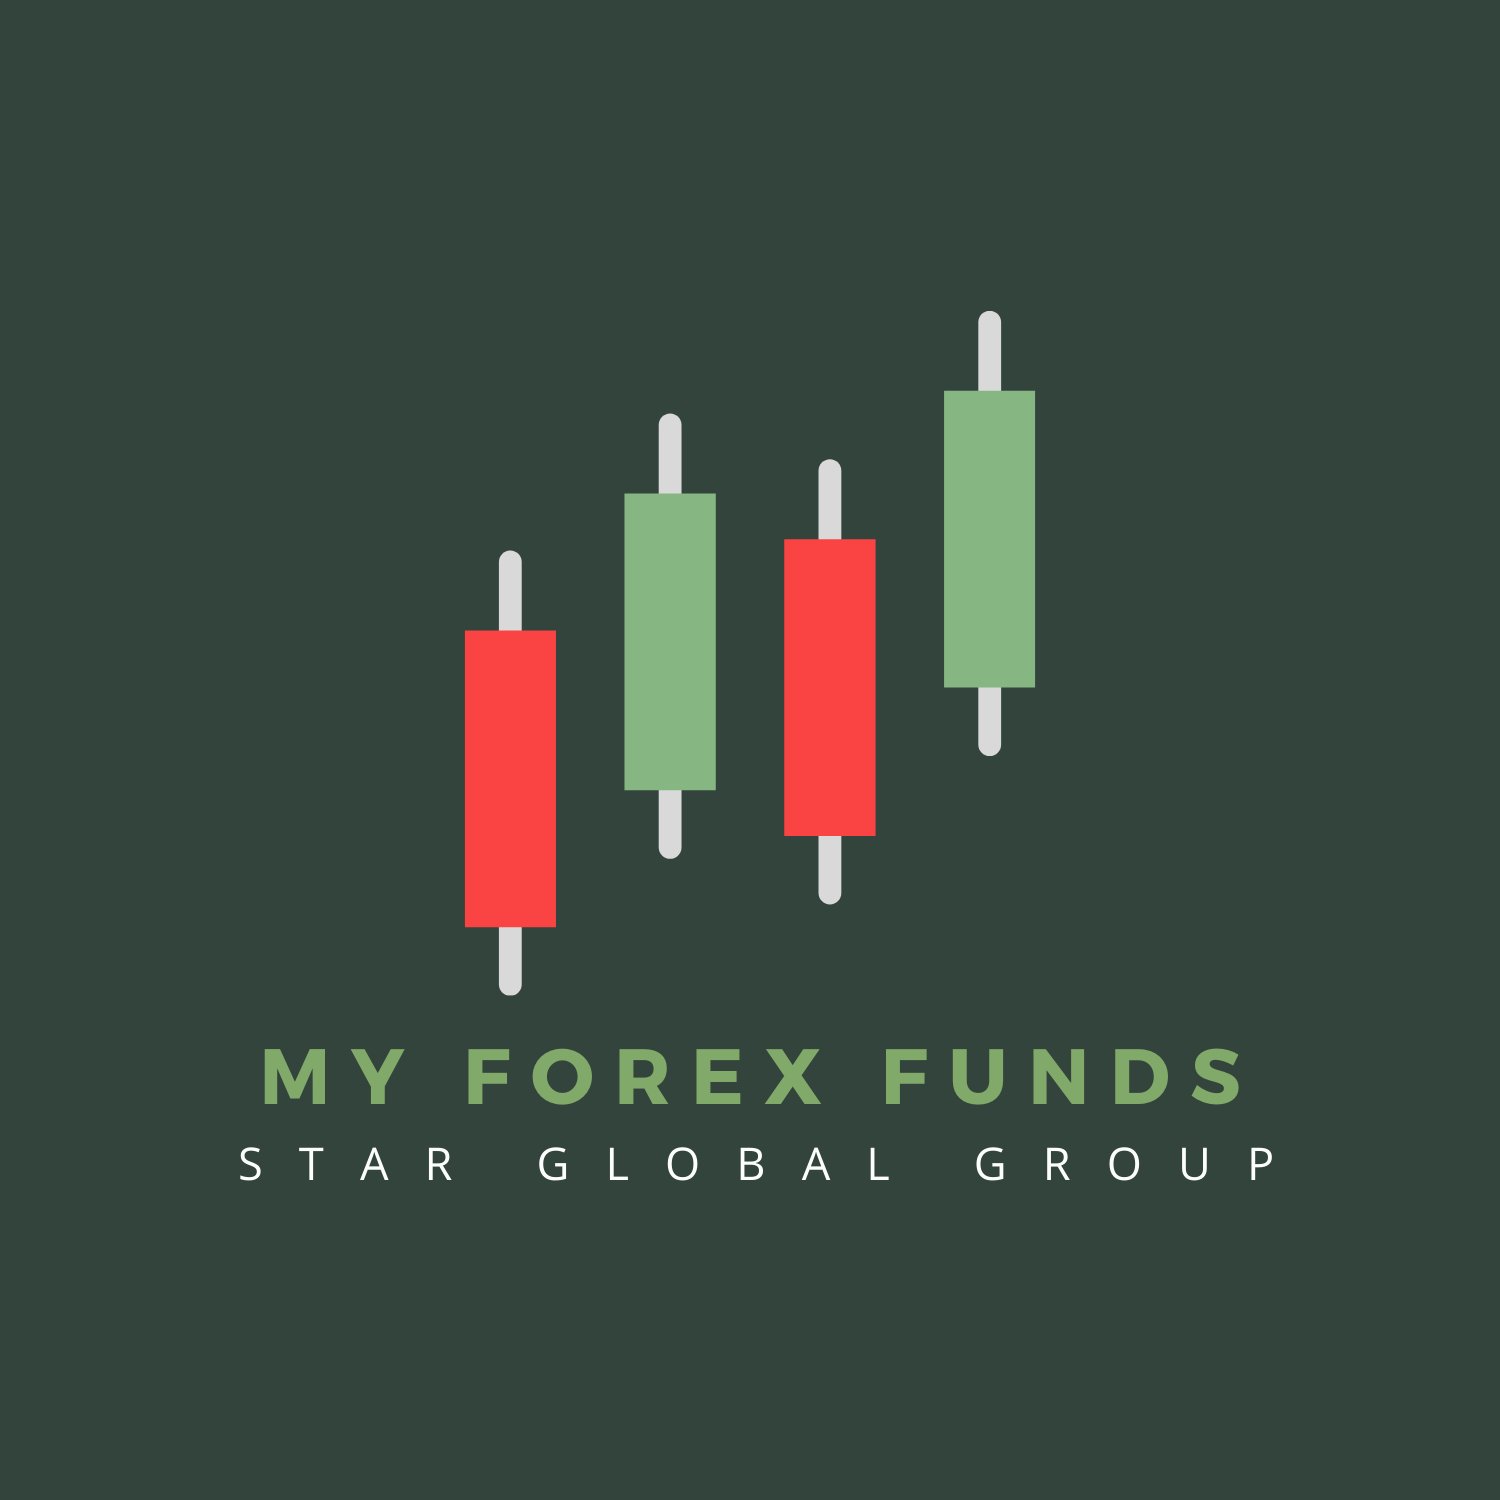 Funds or forex investing ill conditioned matrices